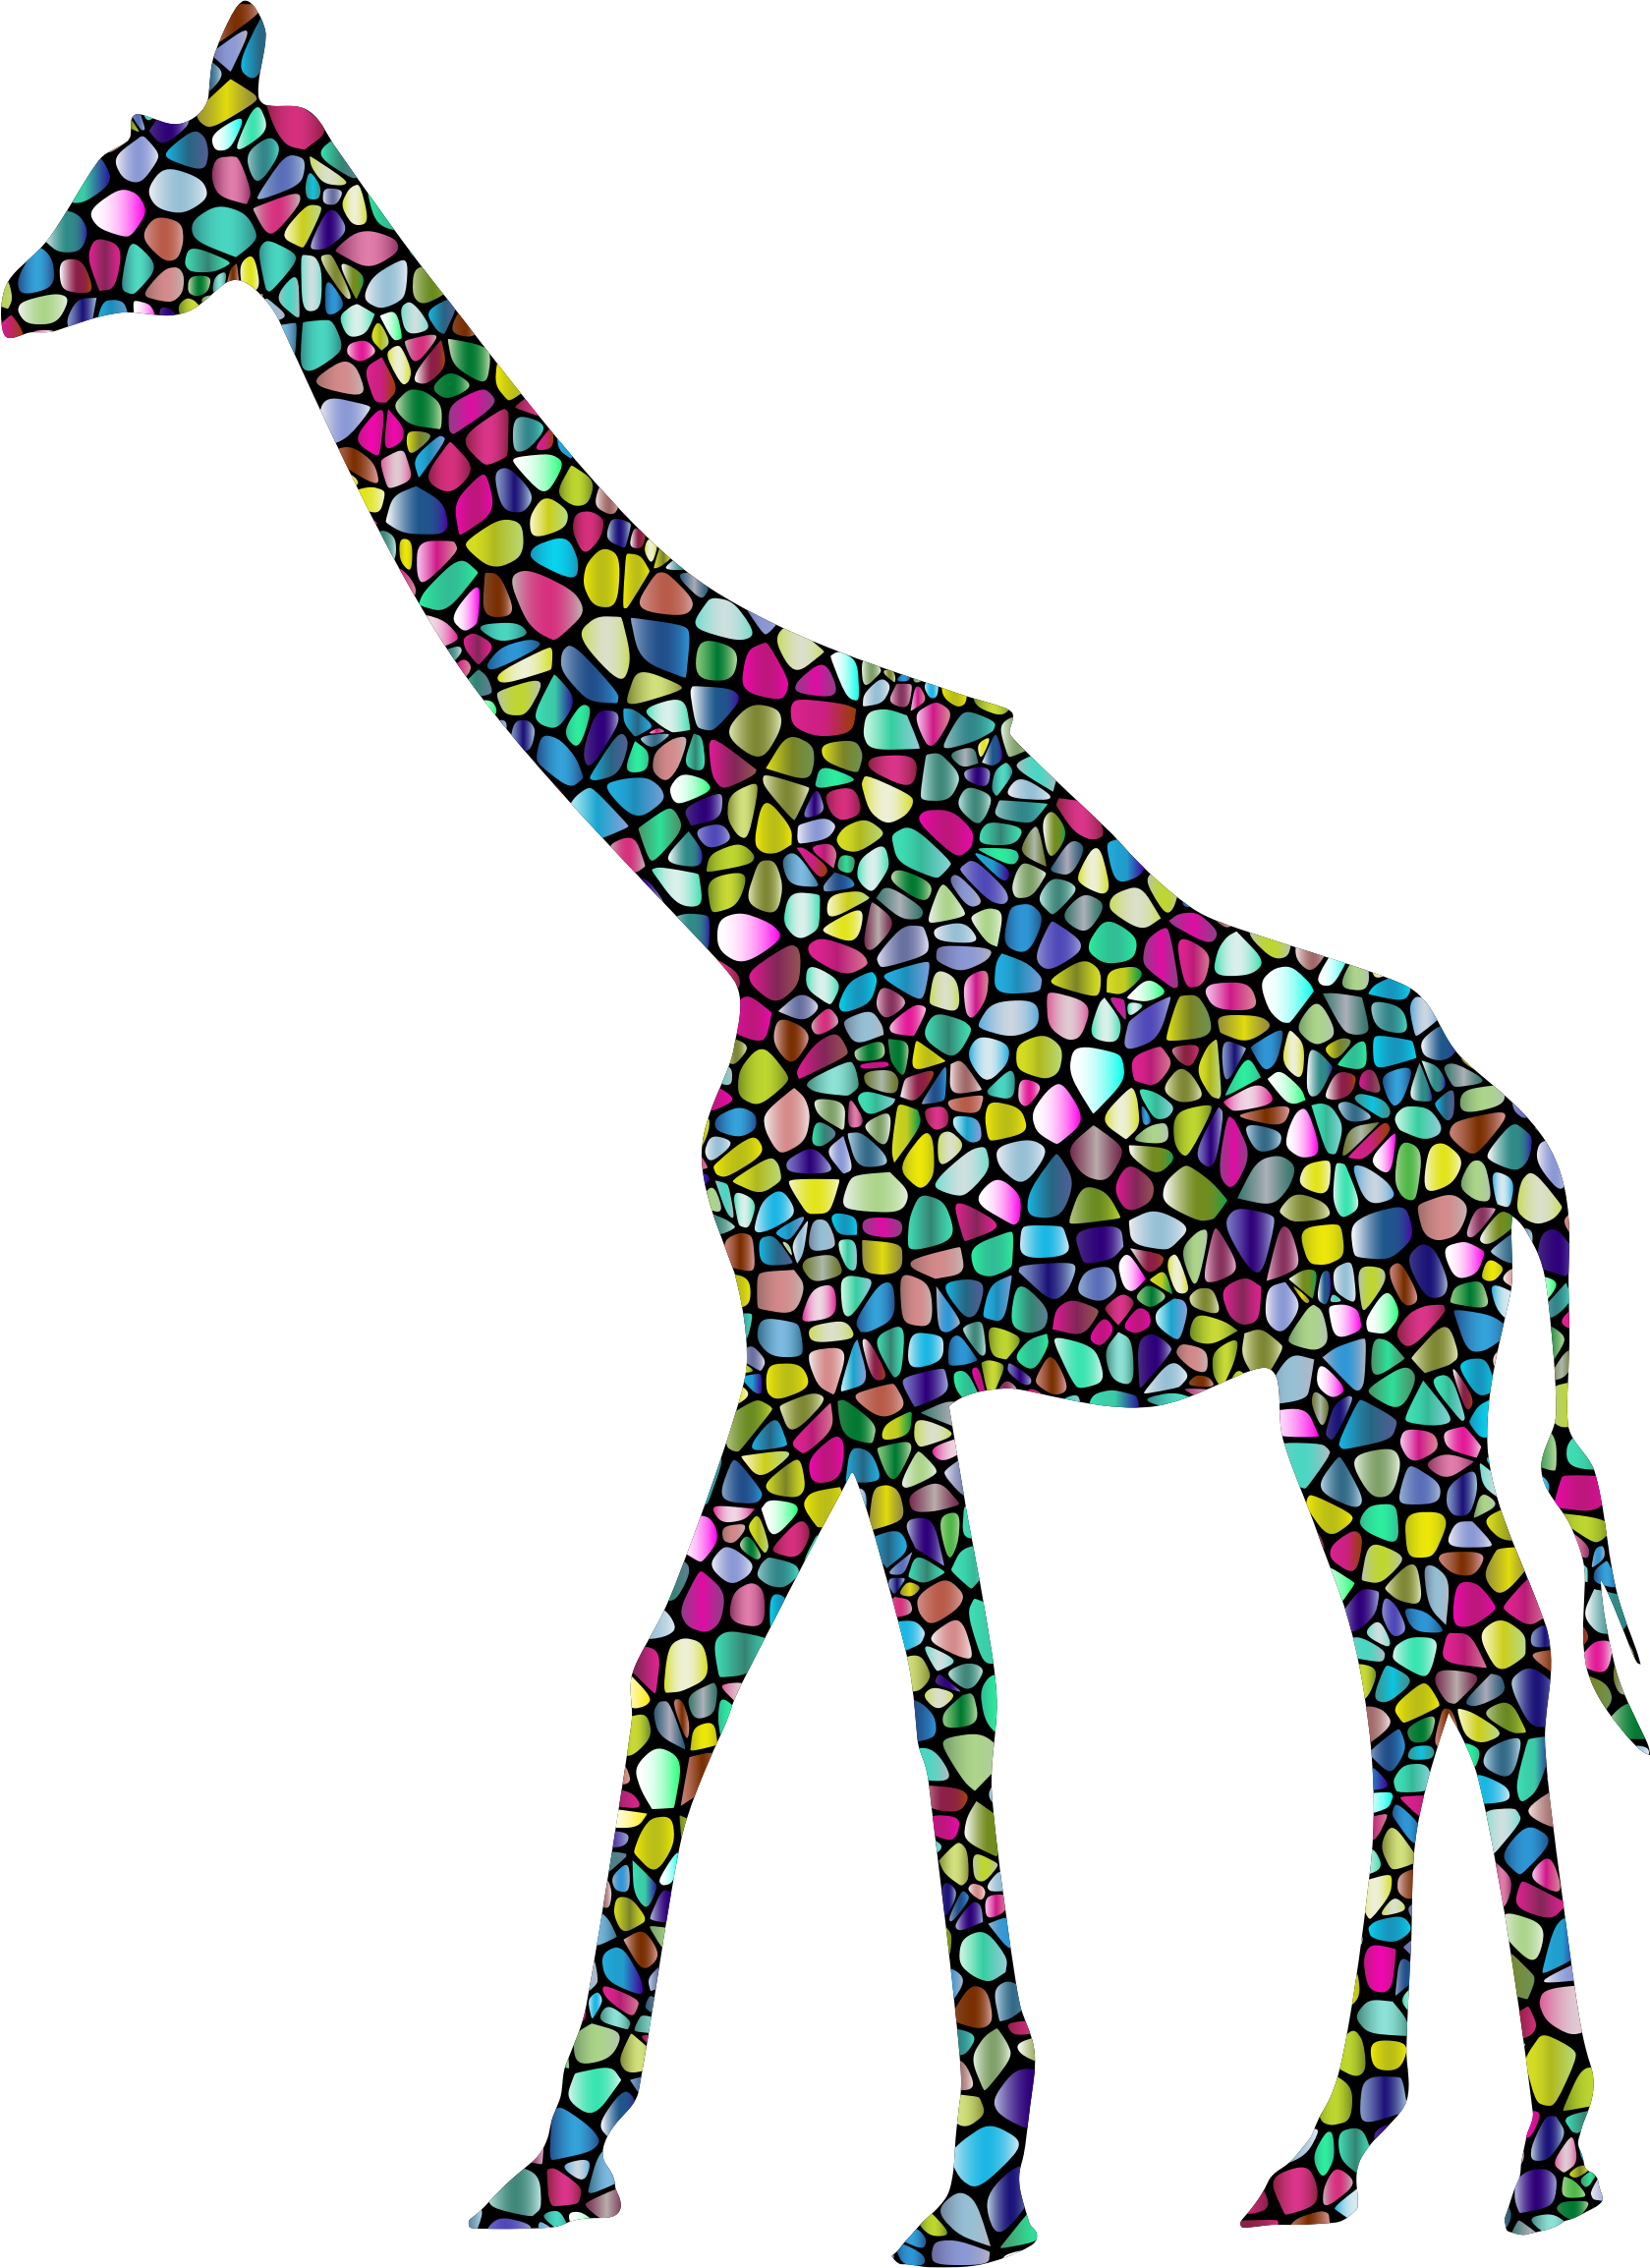 Giraffe Clipart Sophie - Sophie The Giraffe Logo, HD Png Download is free  transparent png image. To explore more…